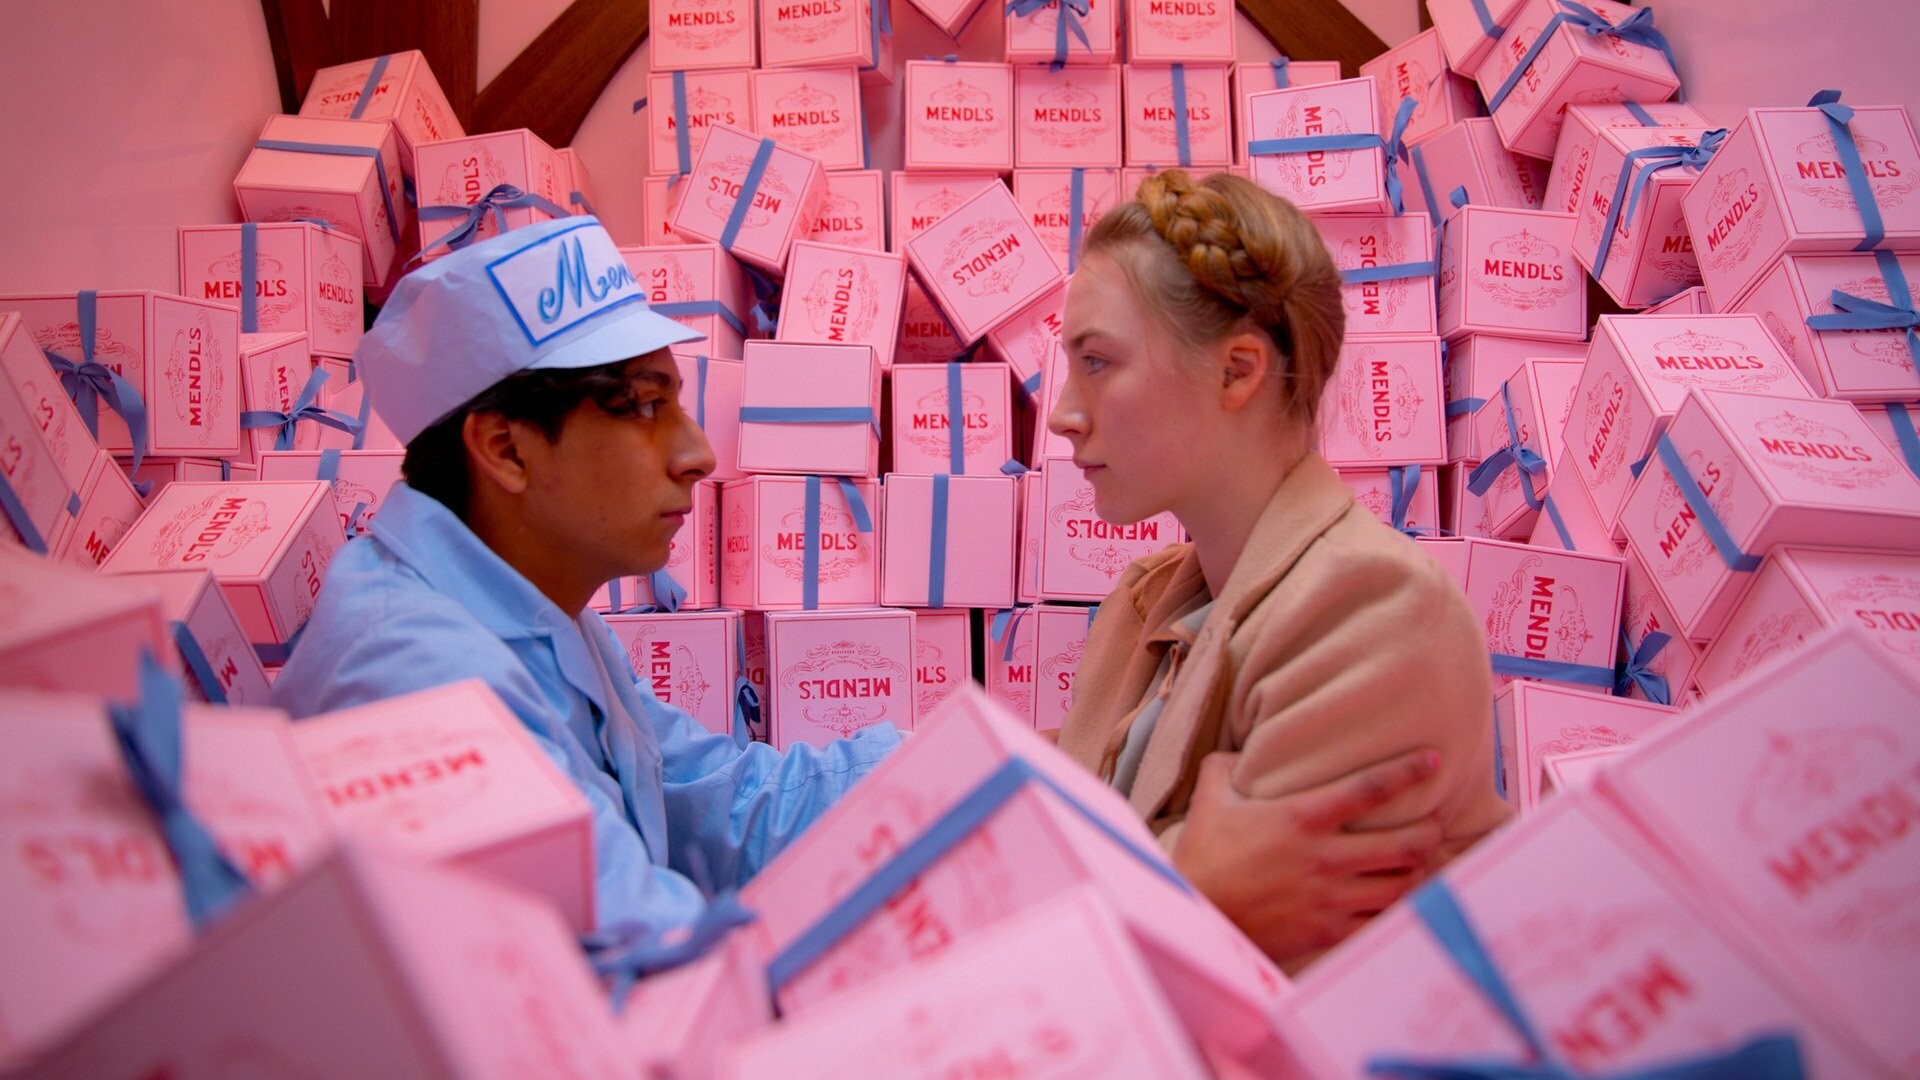 The Grand Budapest Hotel, HD wallpapers, Captivating background images, Visual delight, 1920x1080 Full HD Desktop